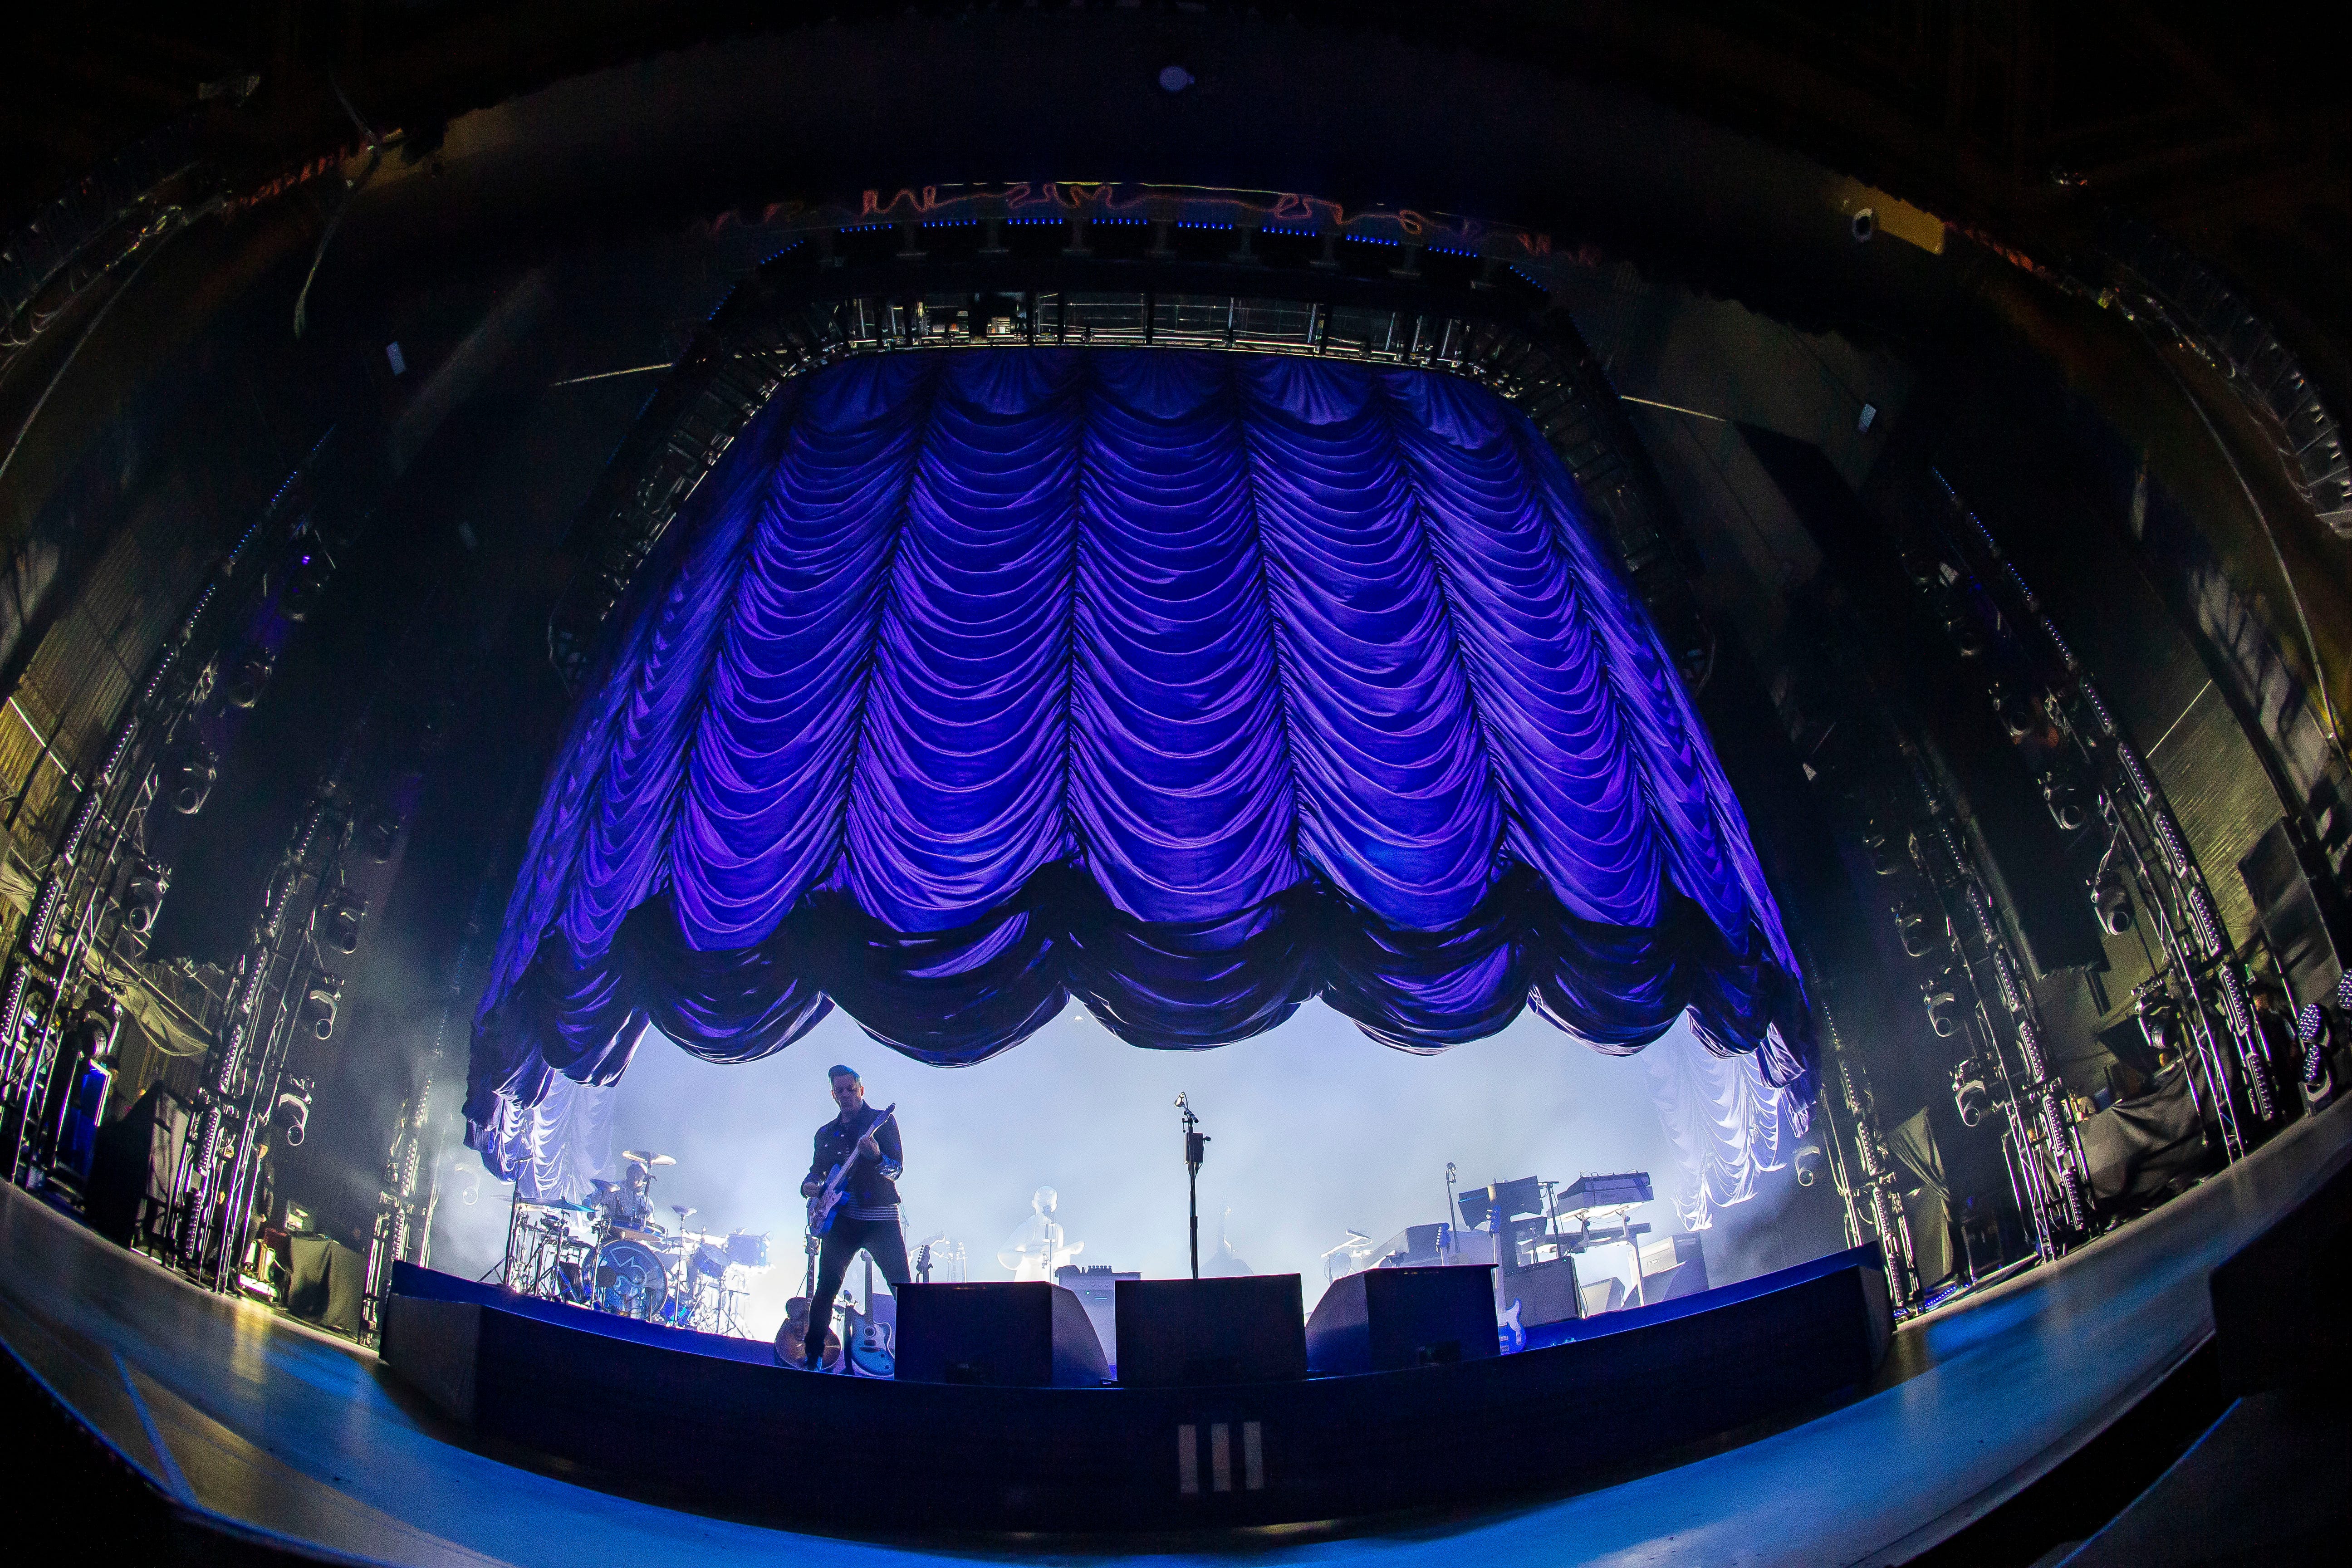 Jack White performs during the bands Supply Chains Issues Tour at the Masonic Temple on April 8, 2022 in Detroit, Michigan.